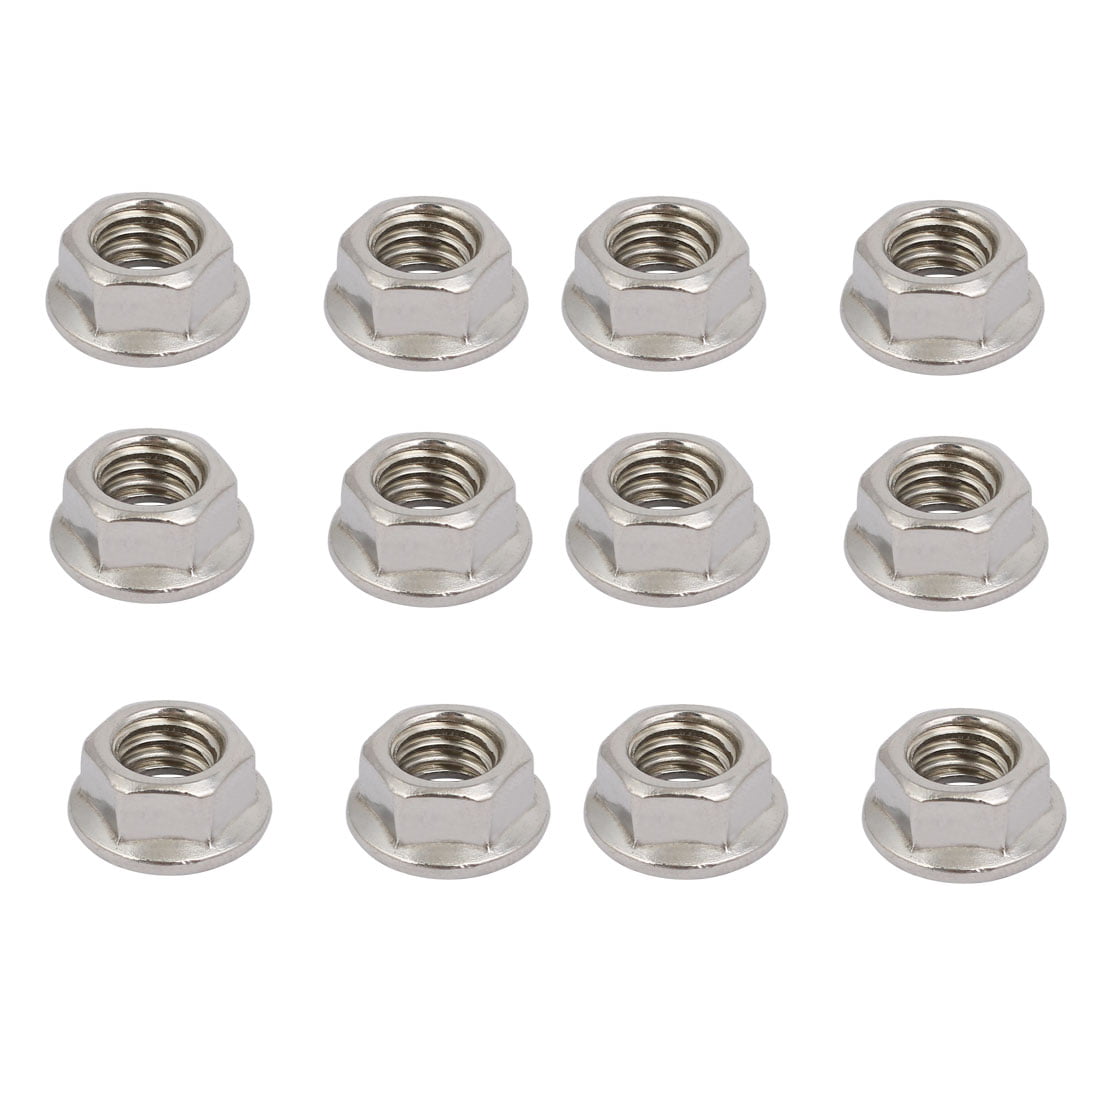 50 Pcs uxcell M3 Serrated Flange Hex Lock Nuts 316 Stainless Steel 